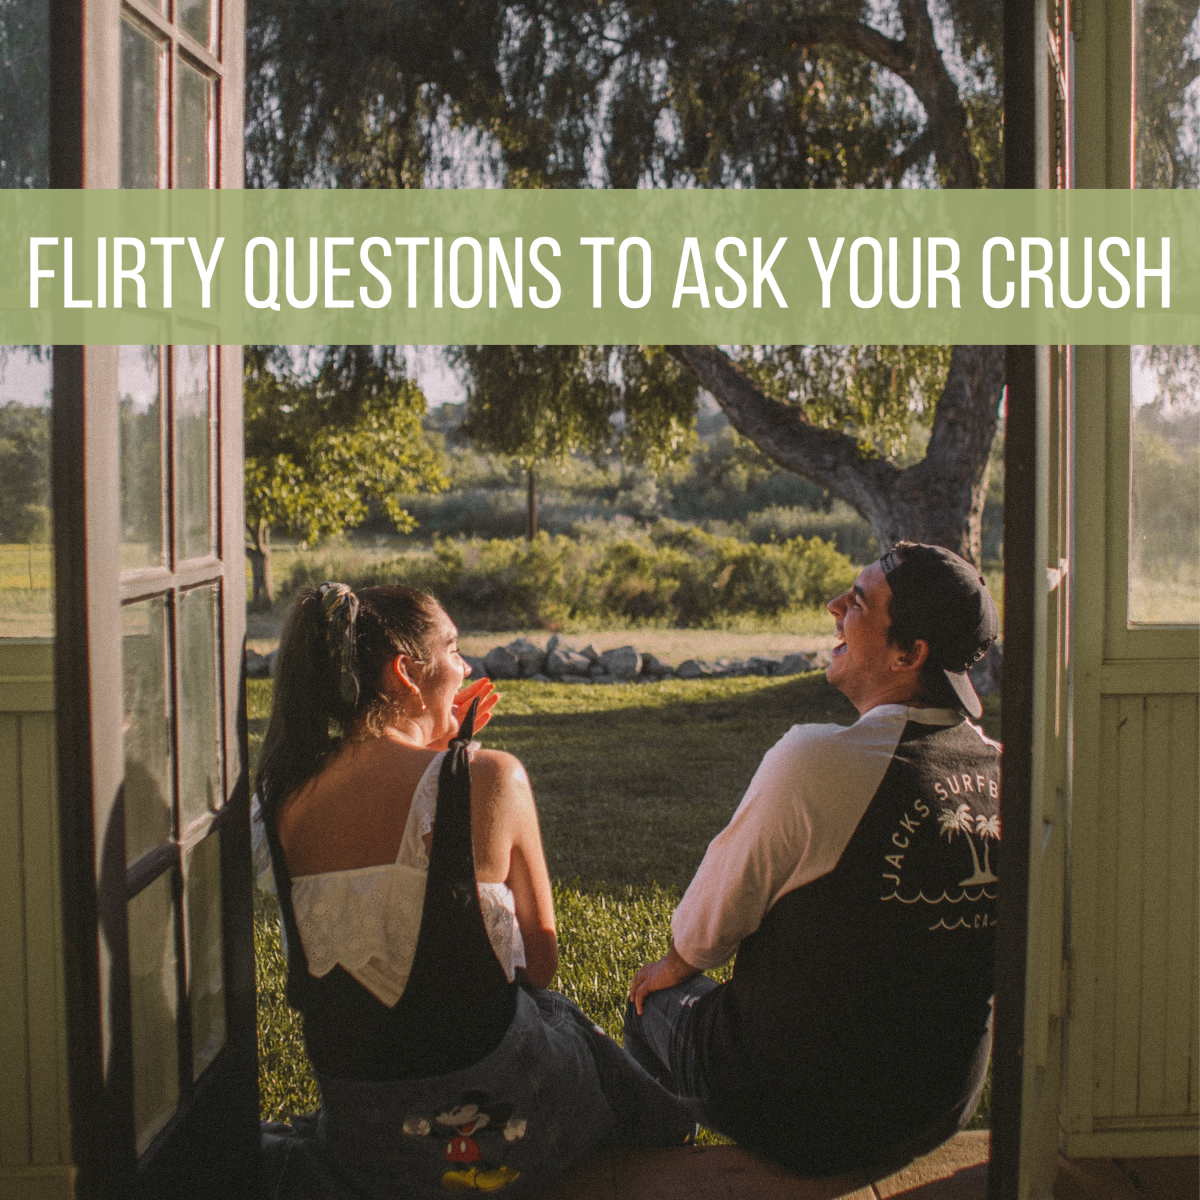 Flirty questions to ask your crush. 